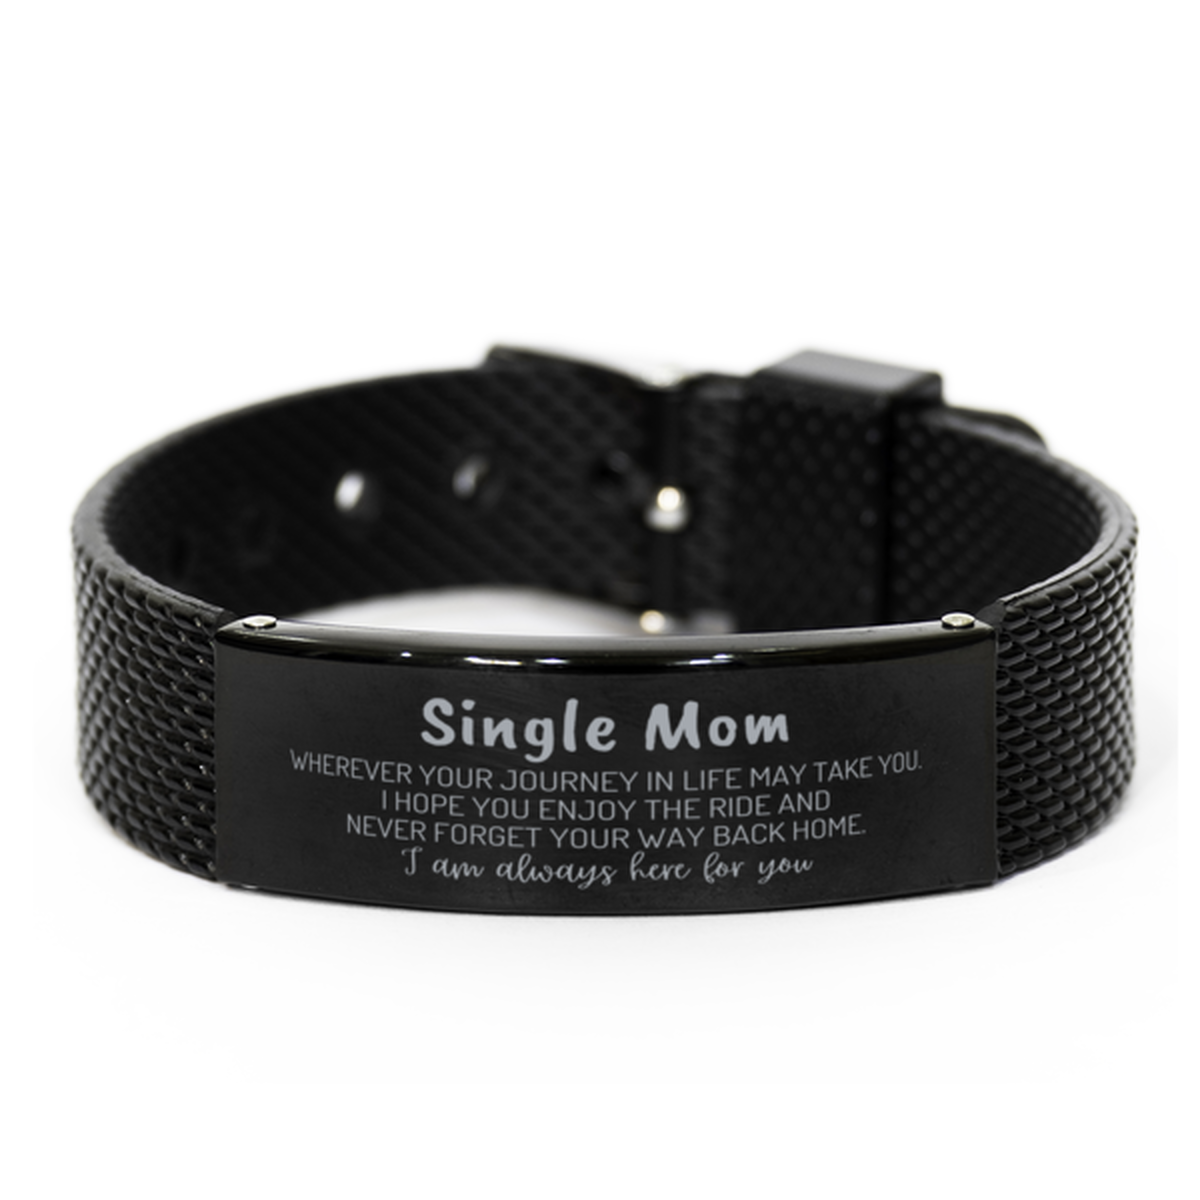 Single Mom wherever your journey in life may take you, I am always here for you Single Mom Black Shark Mesh Bracelet, Awesome Christmas Gifts For Single Mom, Single Mom Birthday Gifts for Men Women Family Loved One